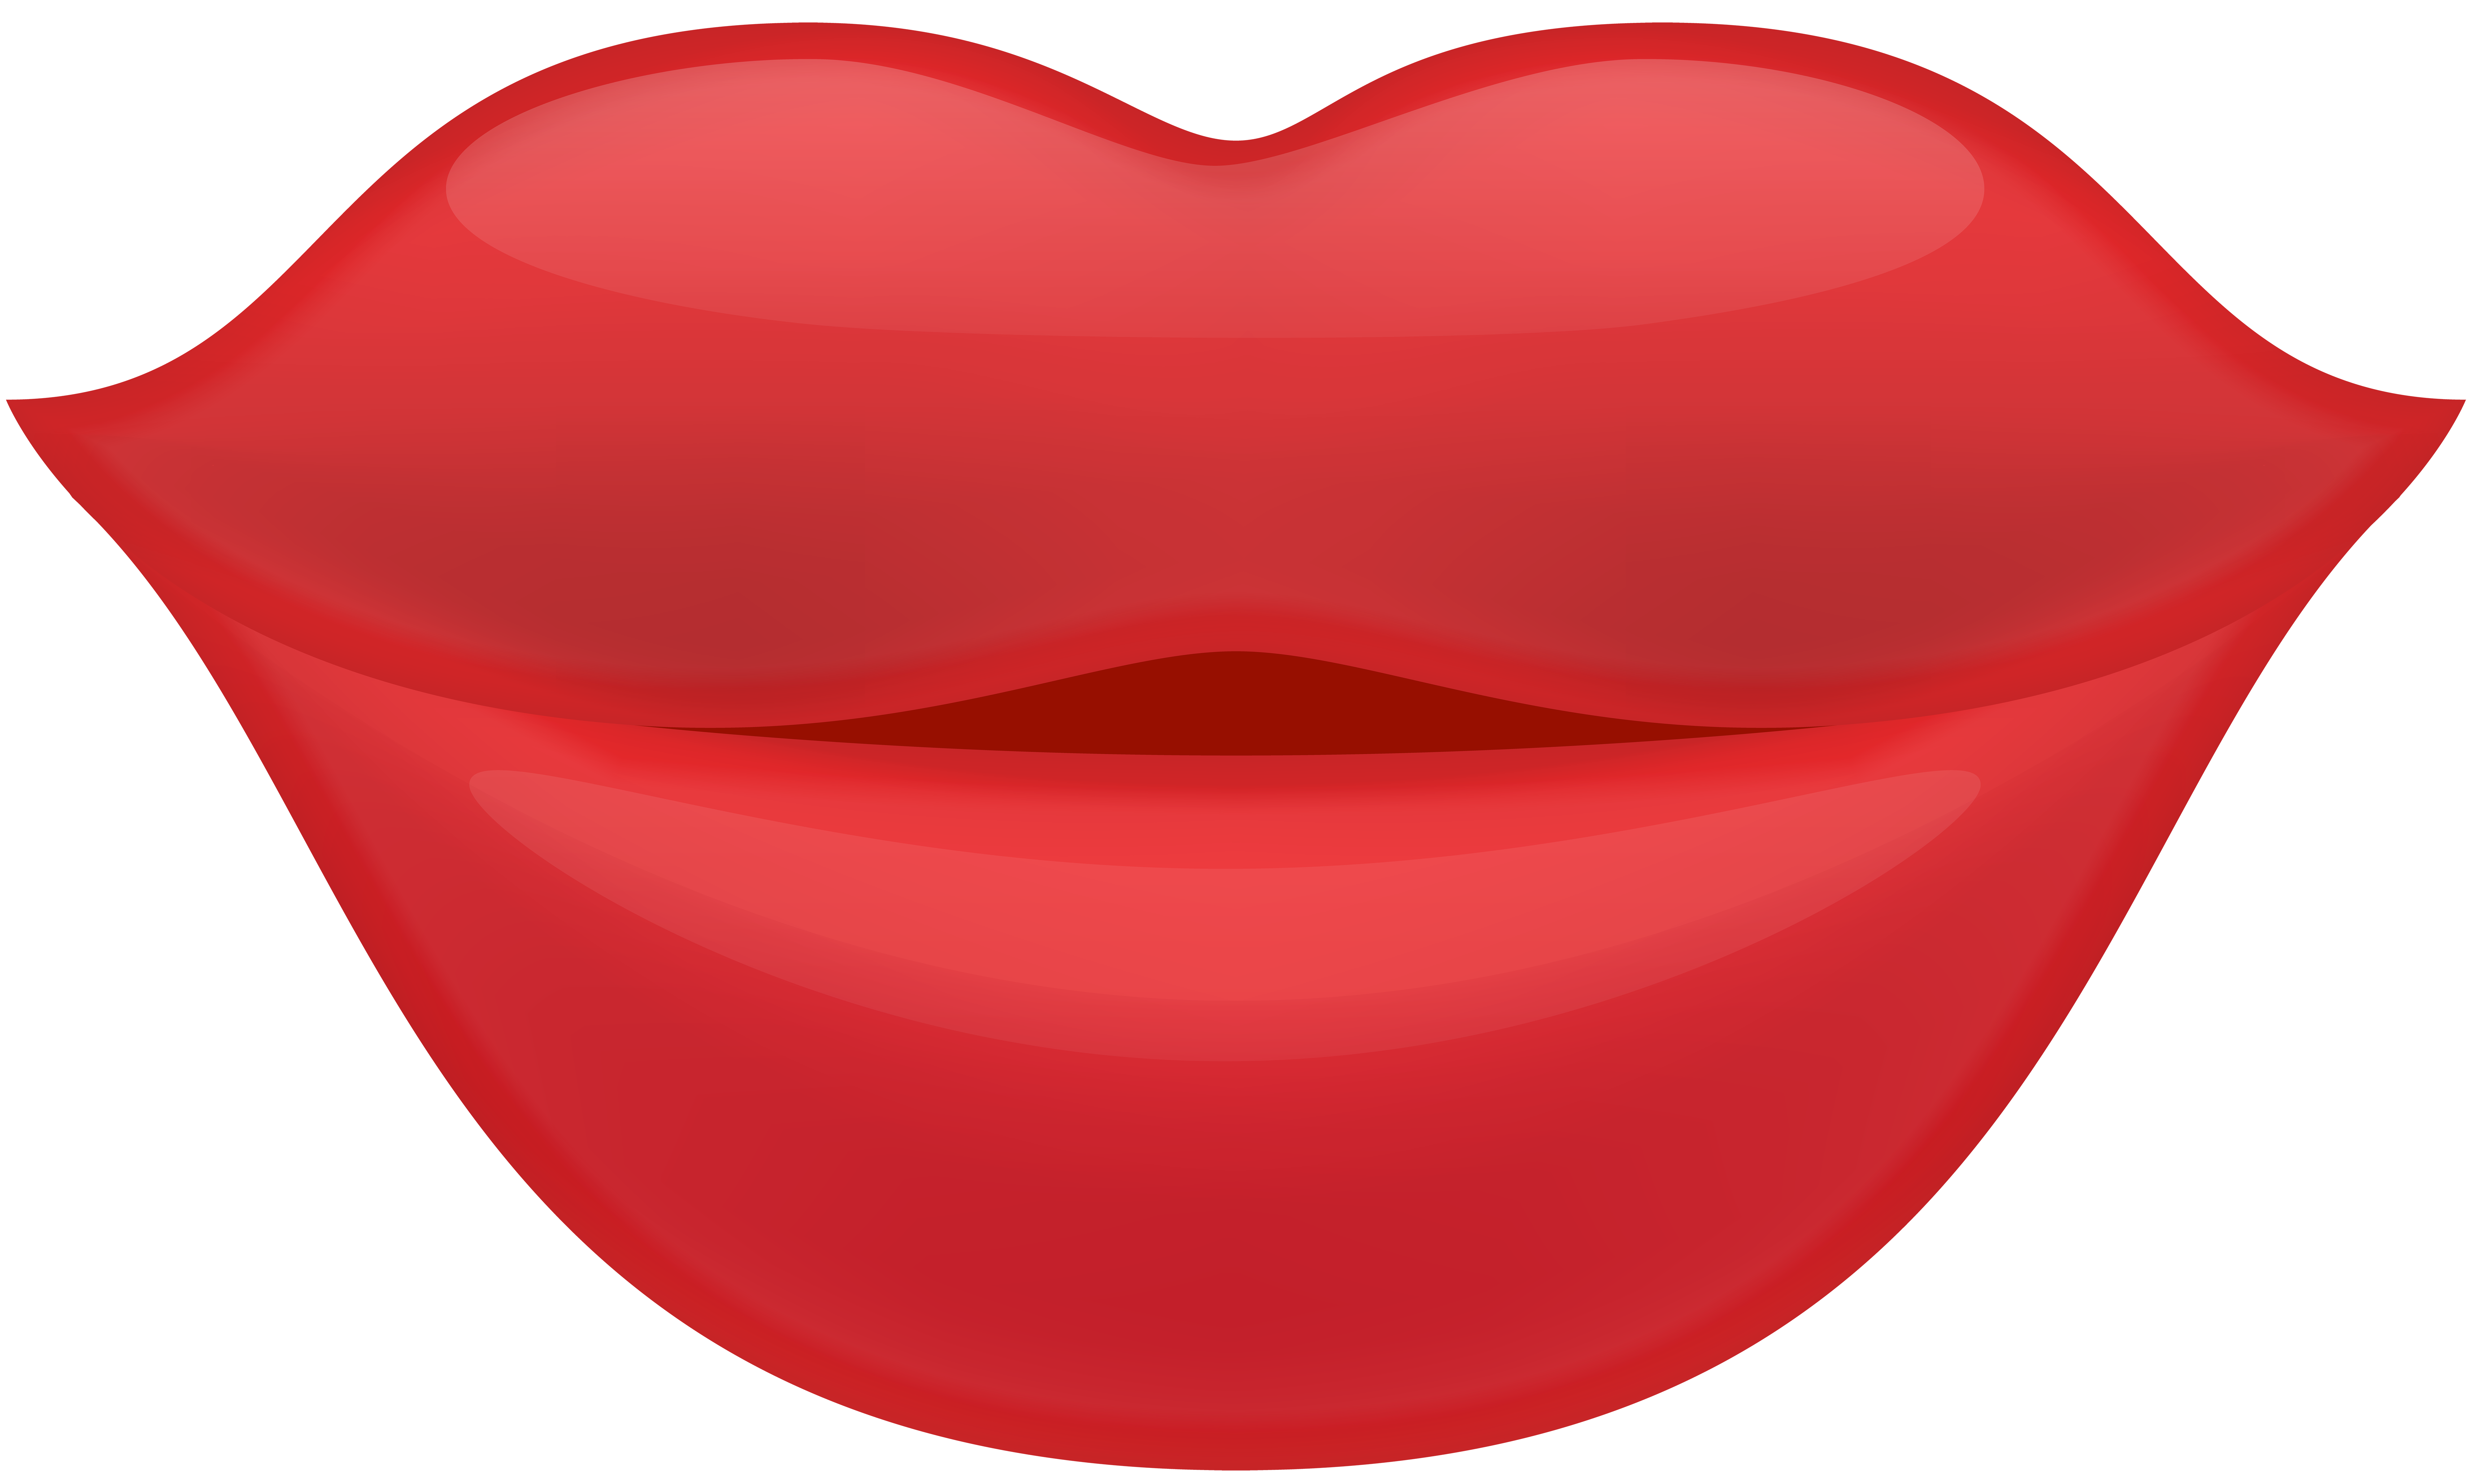 Free Lips Clip Art Download Free Lips Clip Art Png Images Free